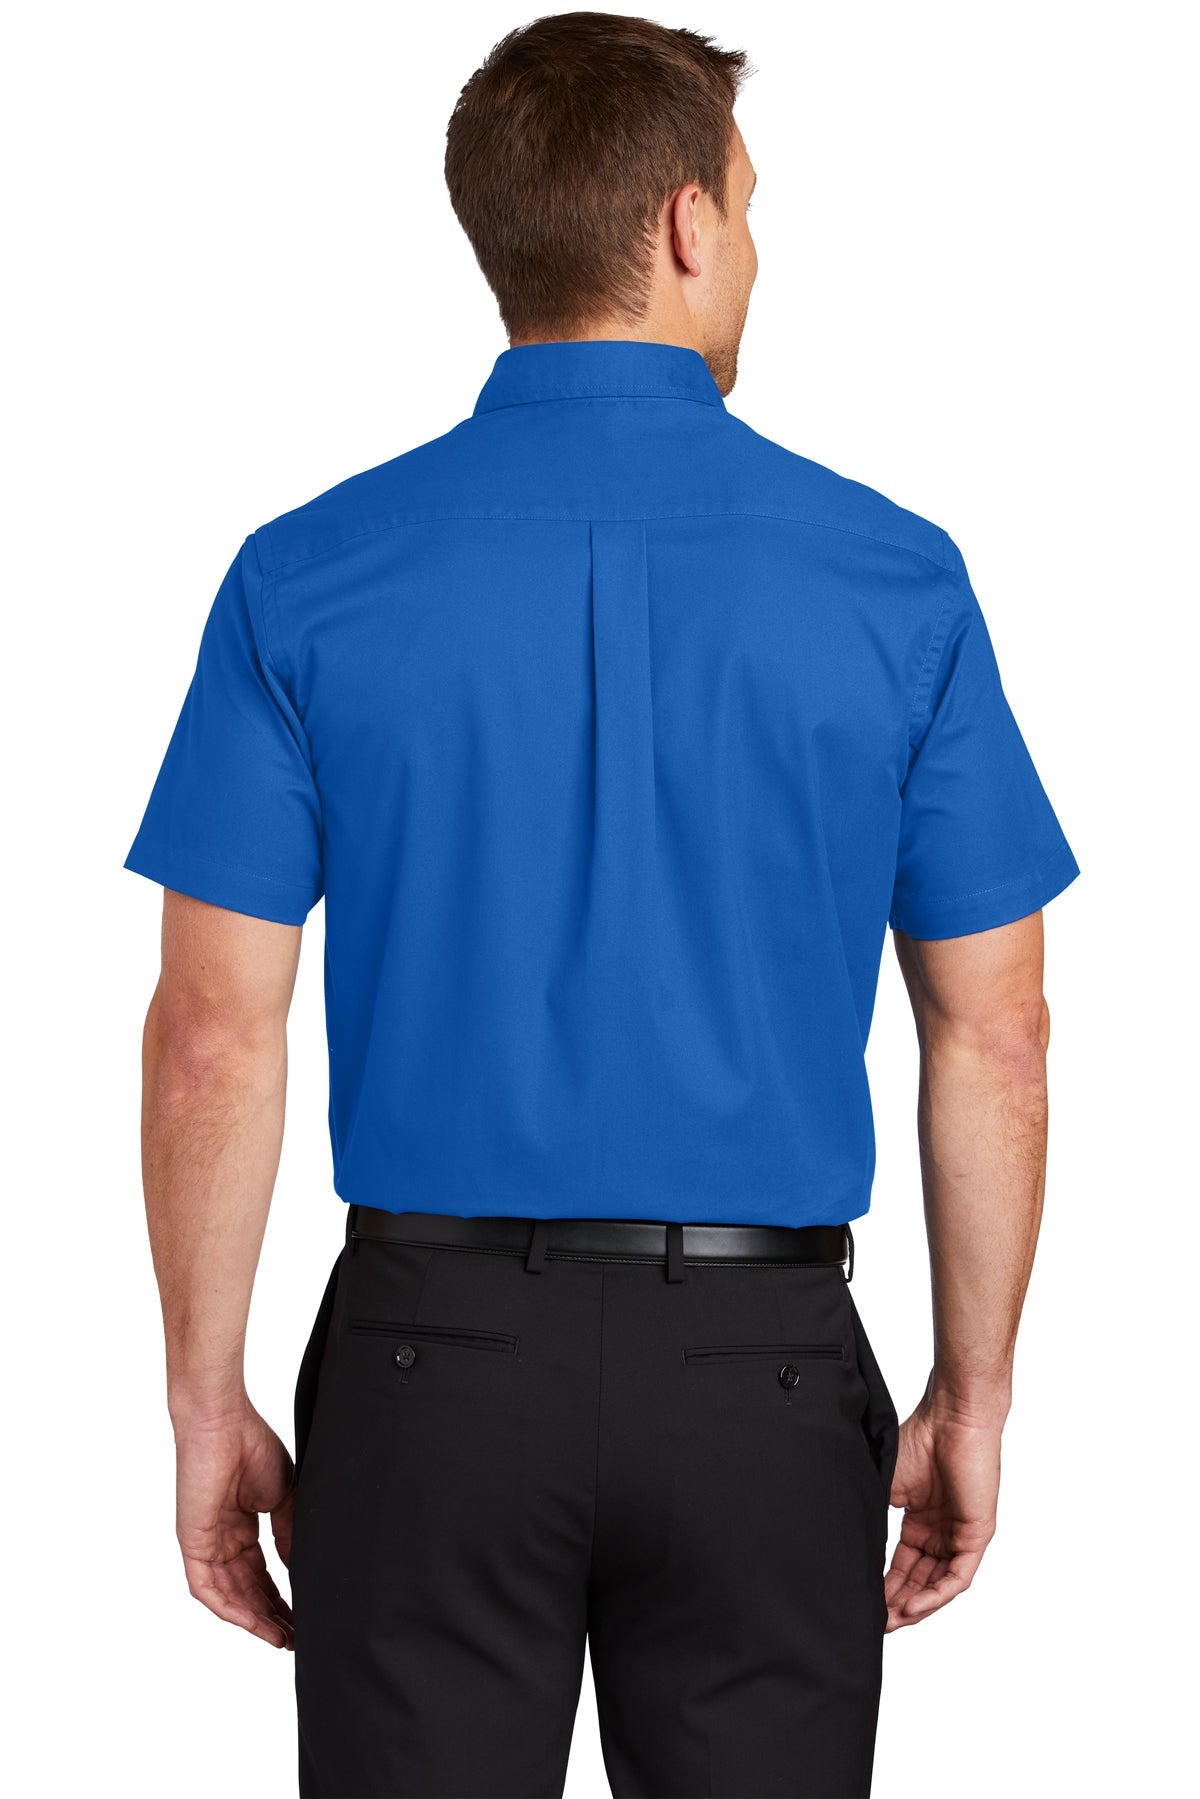 port authority_tls508 _strong blue_company_logo_button downs